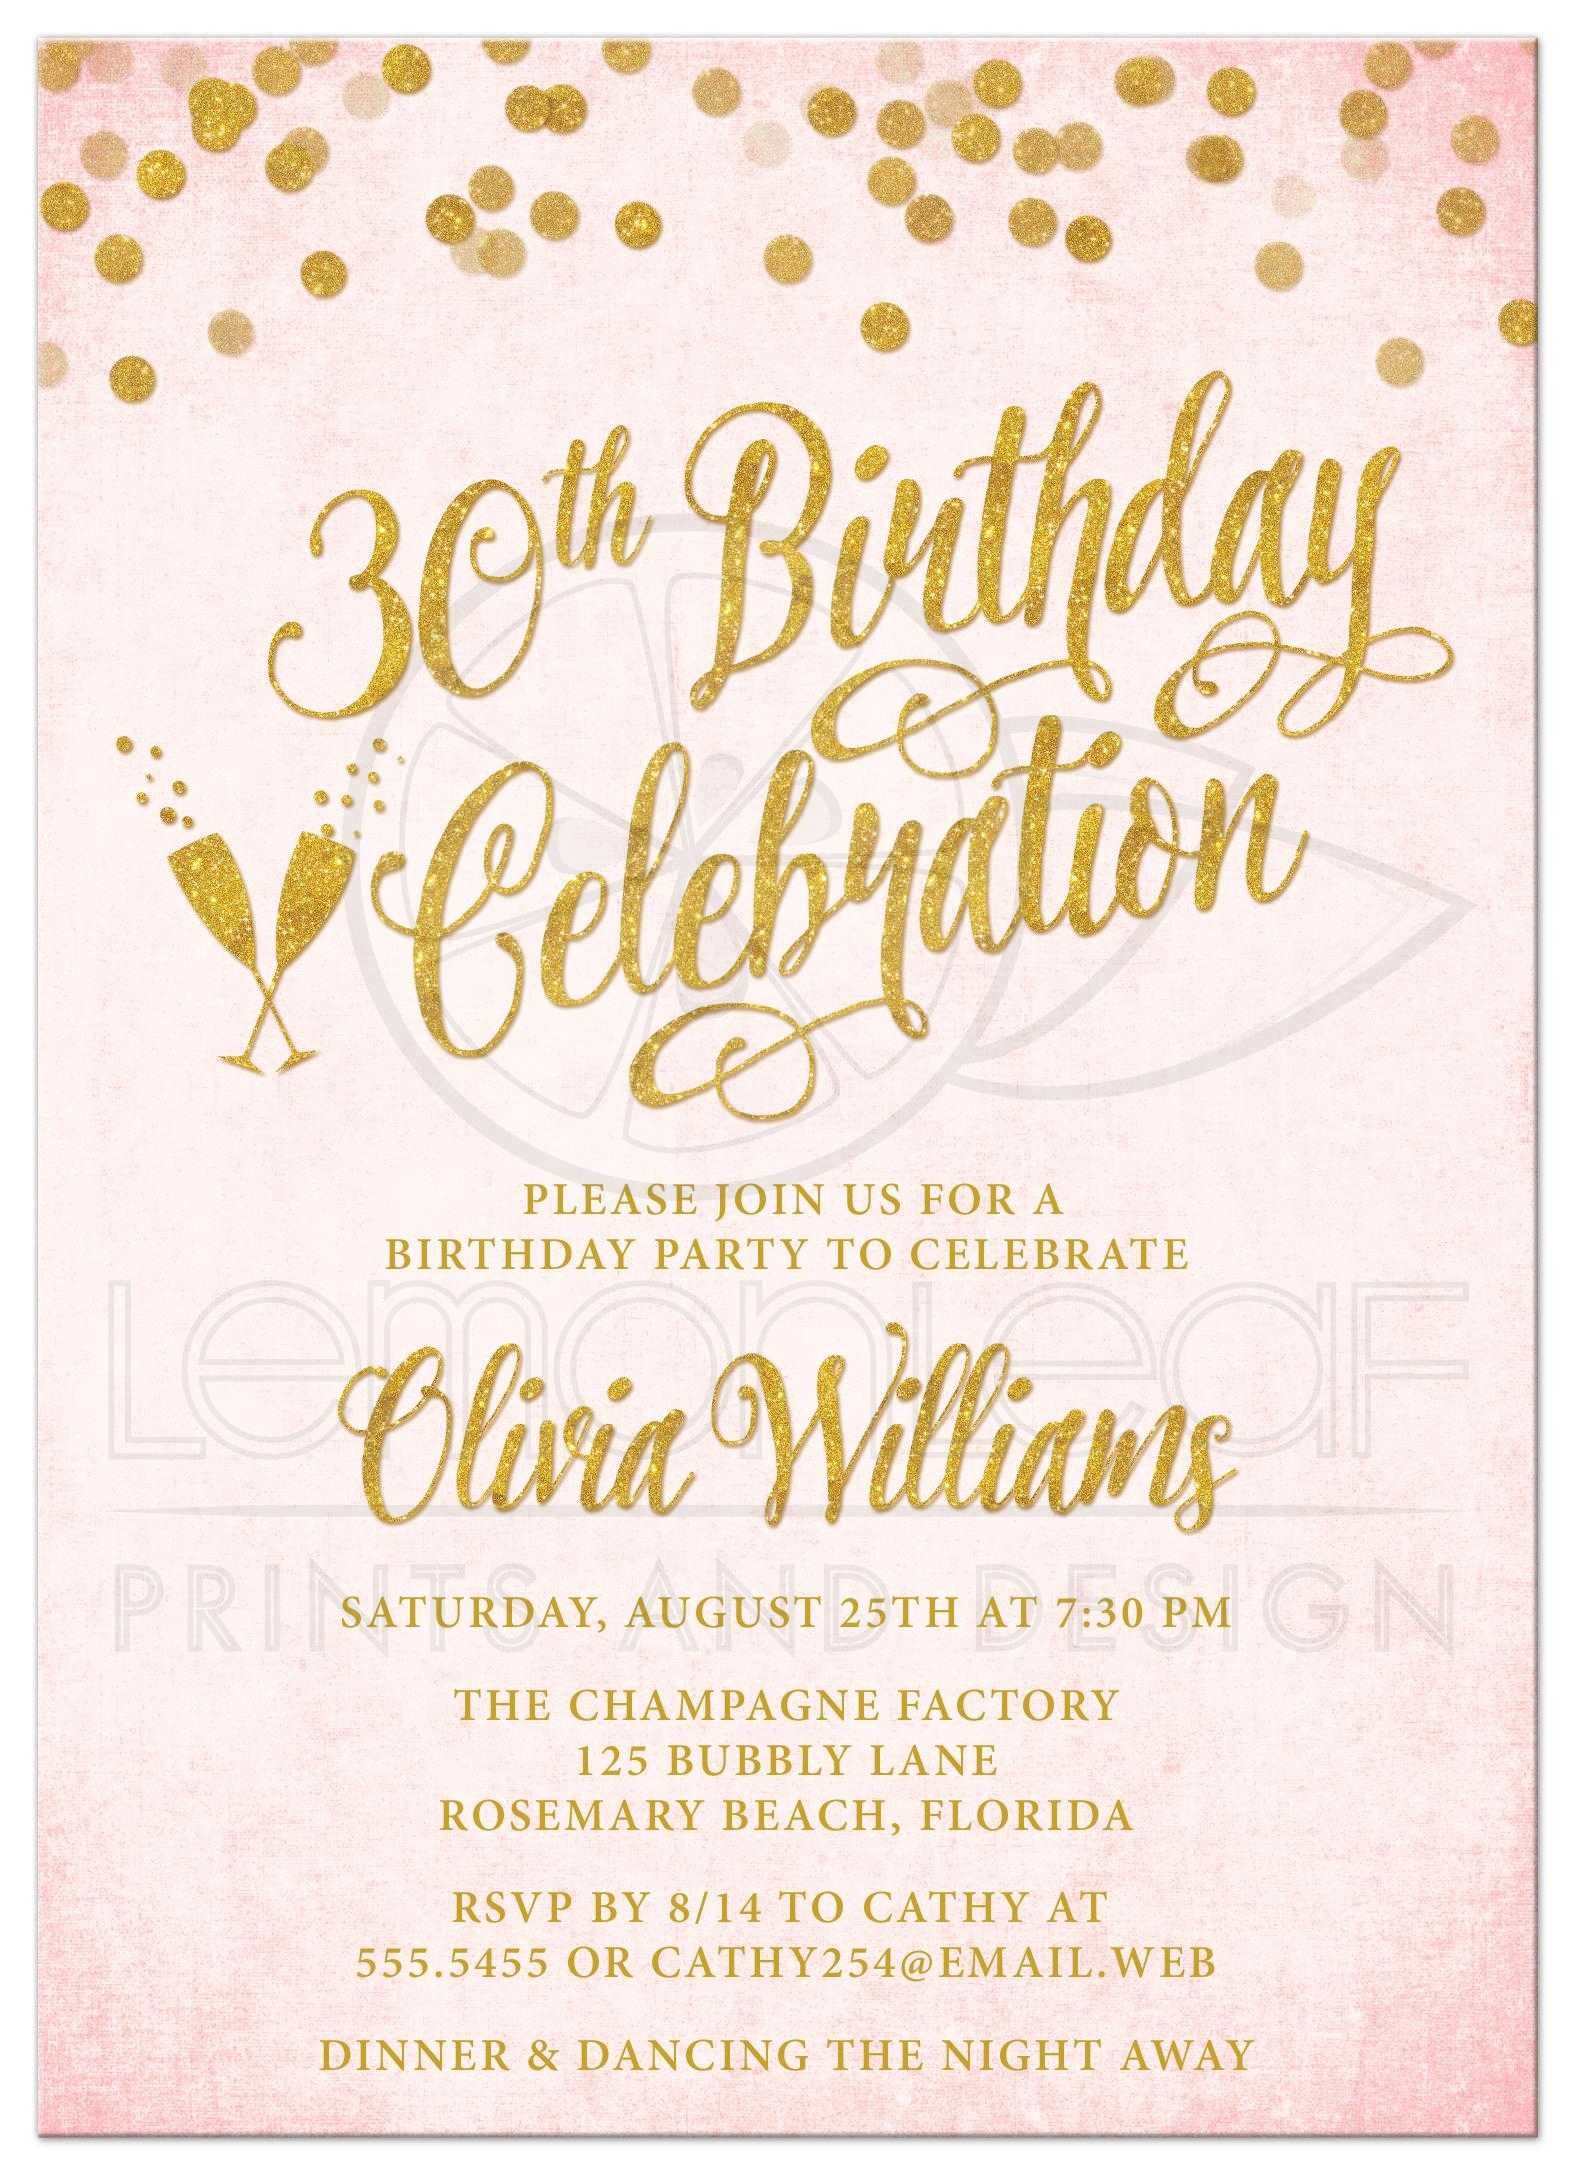 30th Birthday Invitations For Her
 Blush Pink & Gold 30th Birthday Party Invitations